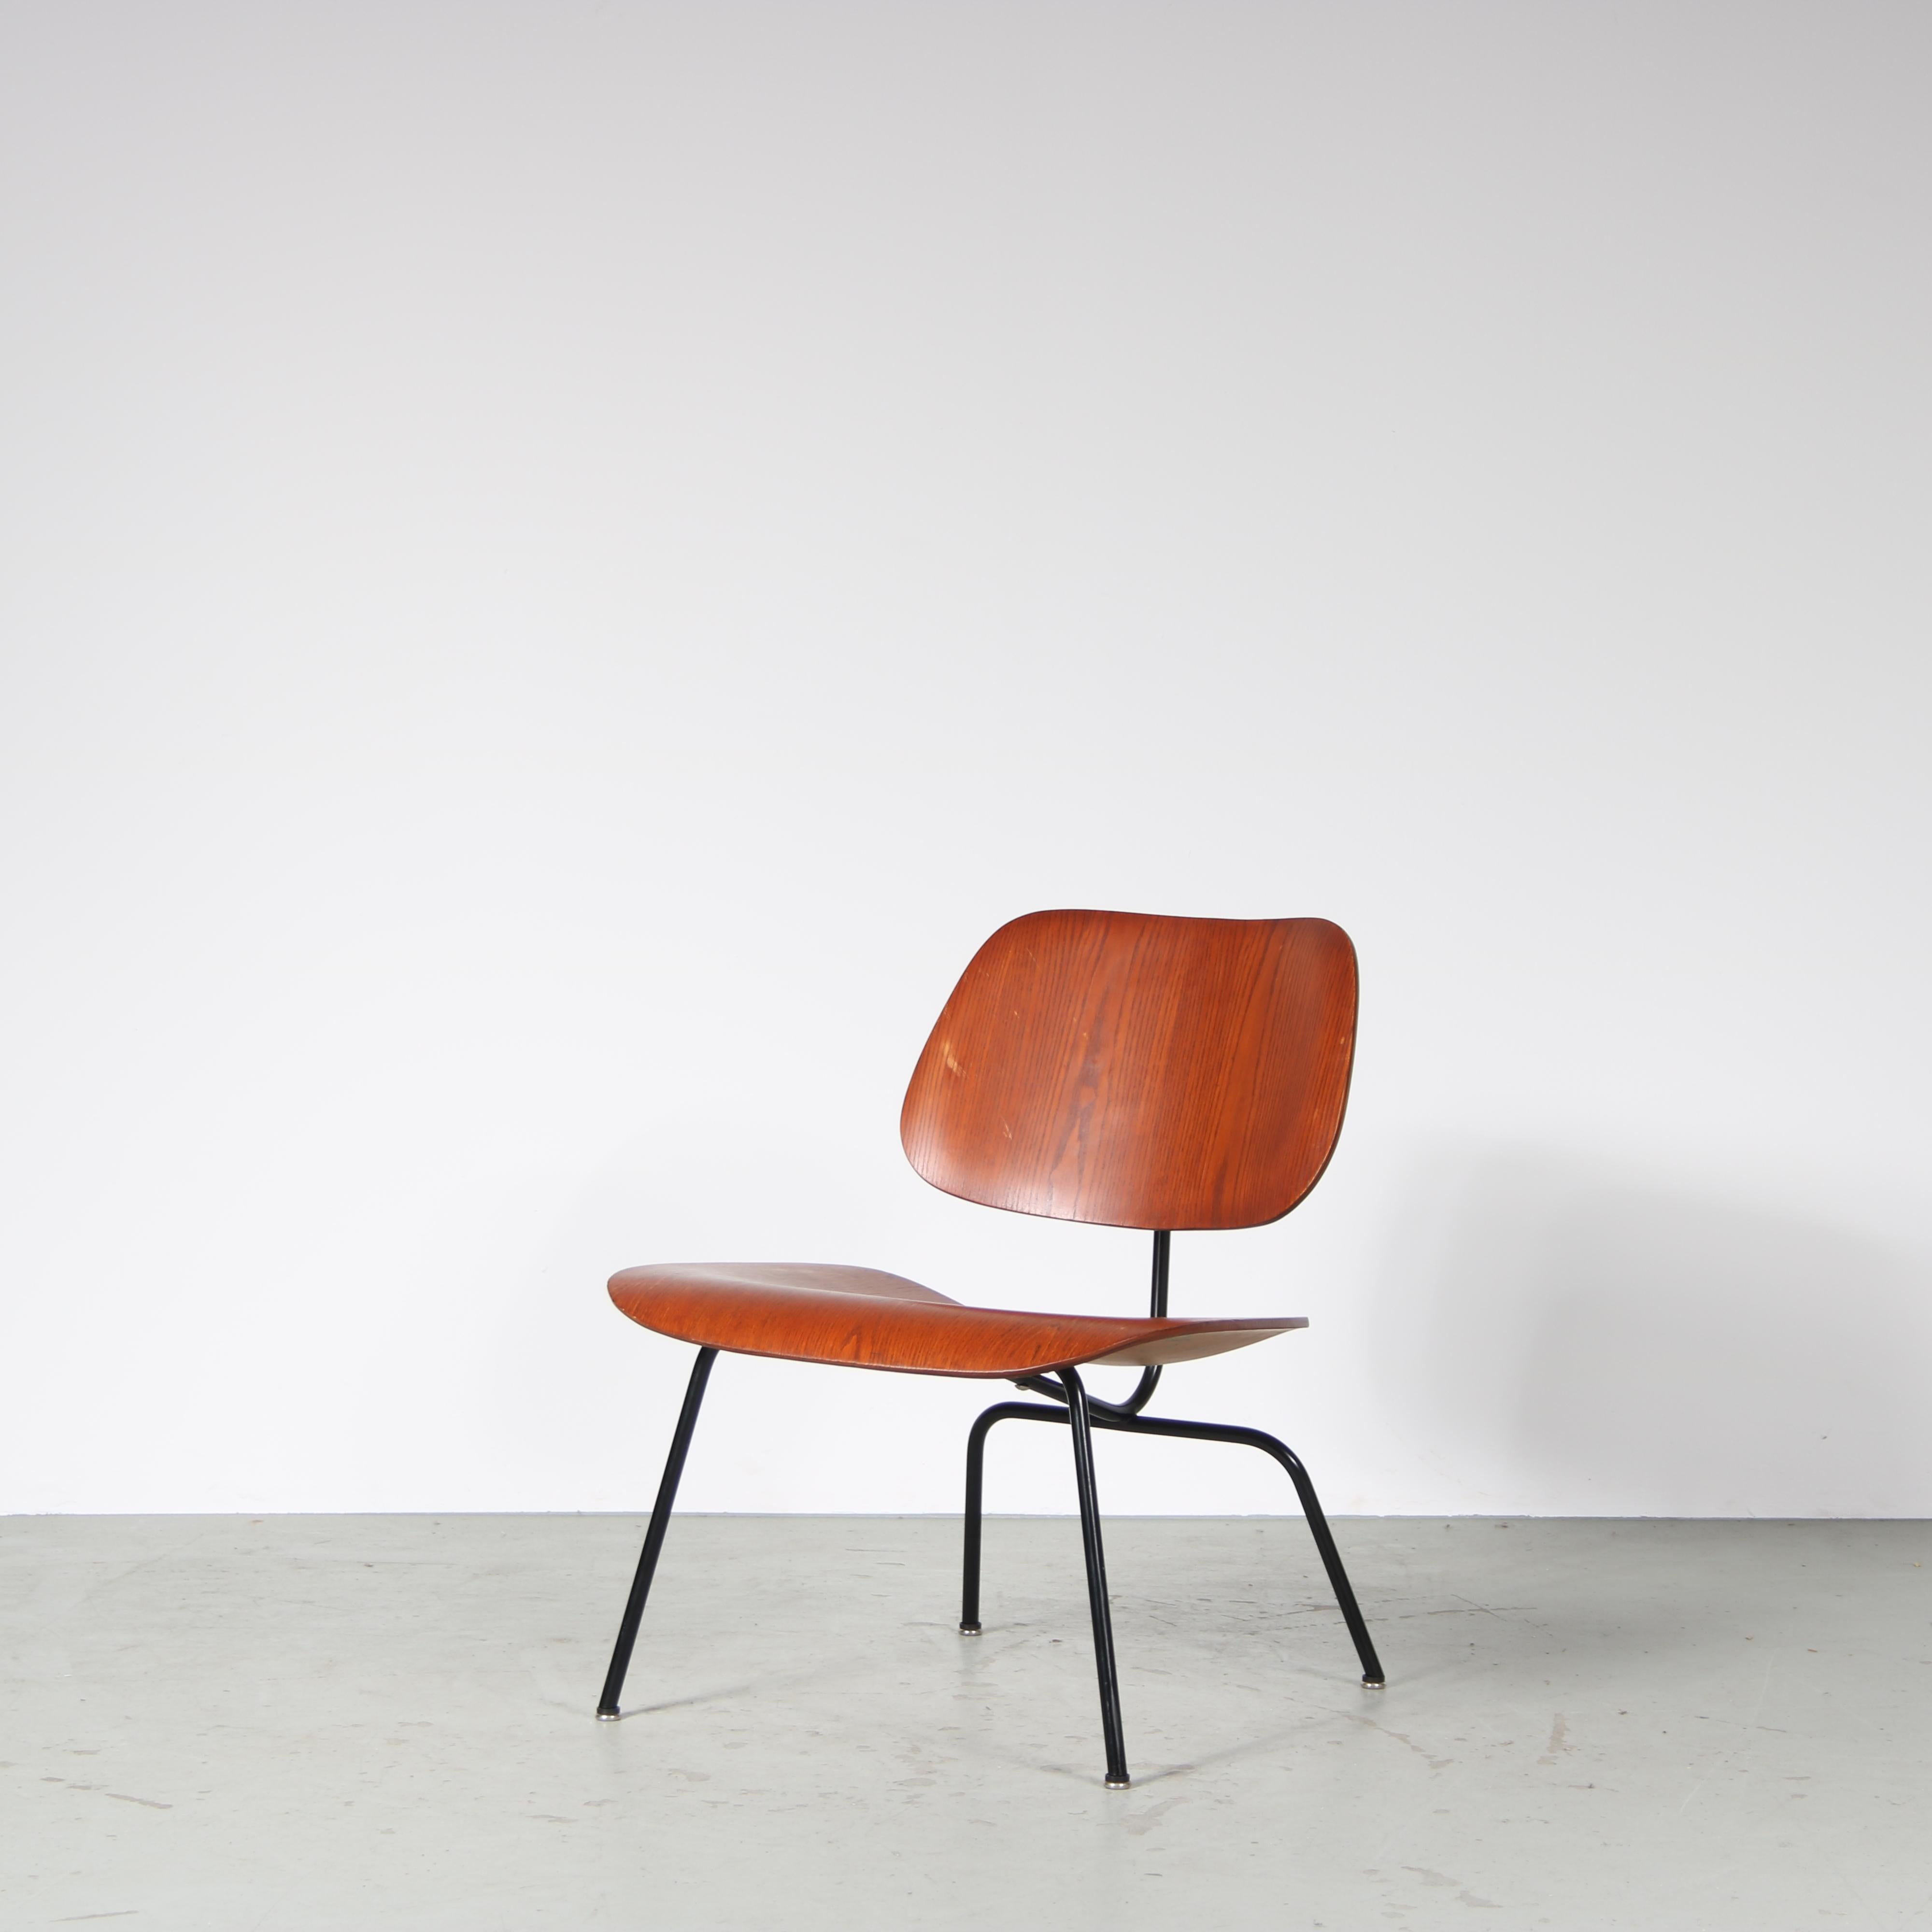 An iconic easy chair, model LCM, designed by Charles & Ray Eames and manufactured by Evans in the USA around 1960.

LCM stands for “Lounge Chair Metal”, because of the metal base, and is a timeless design by the iconic designer duo. The thin black